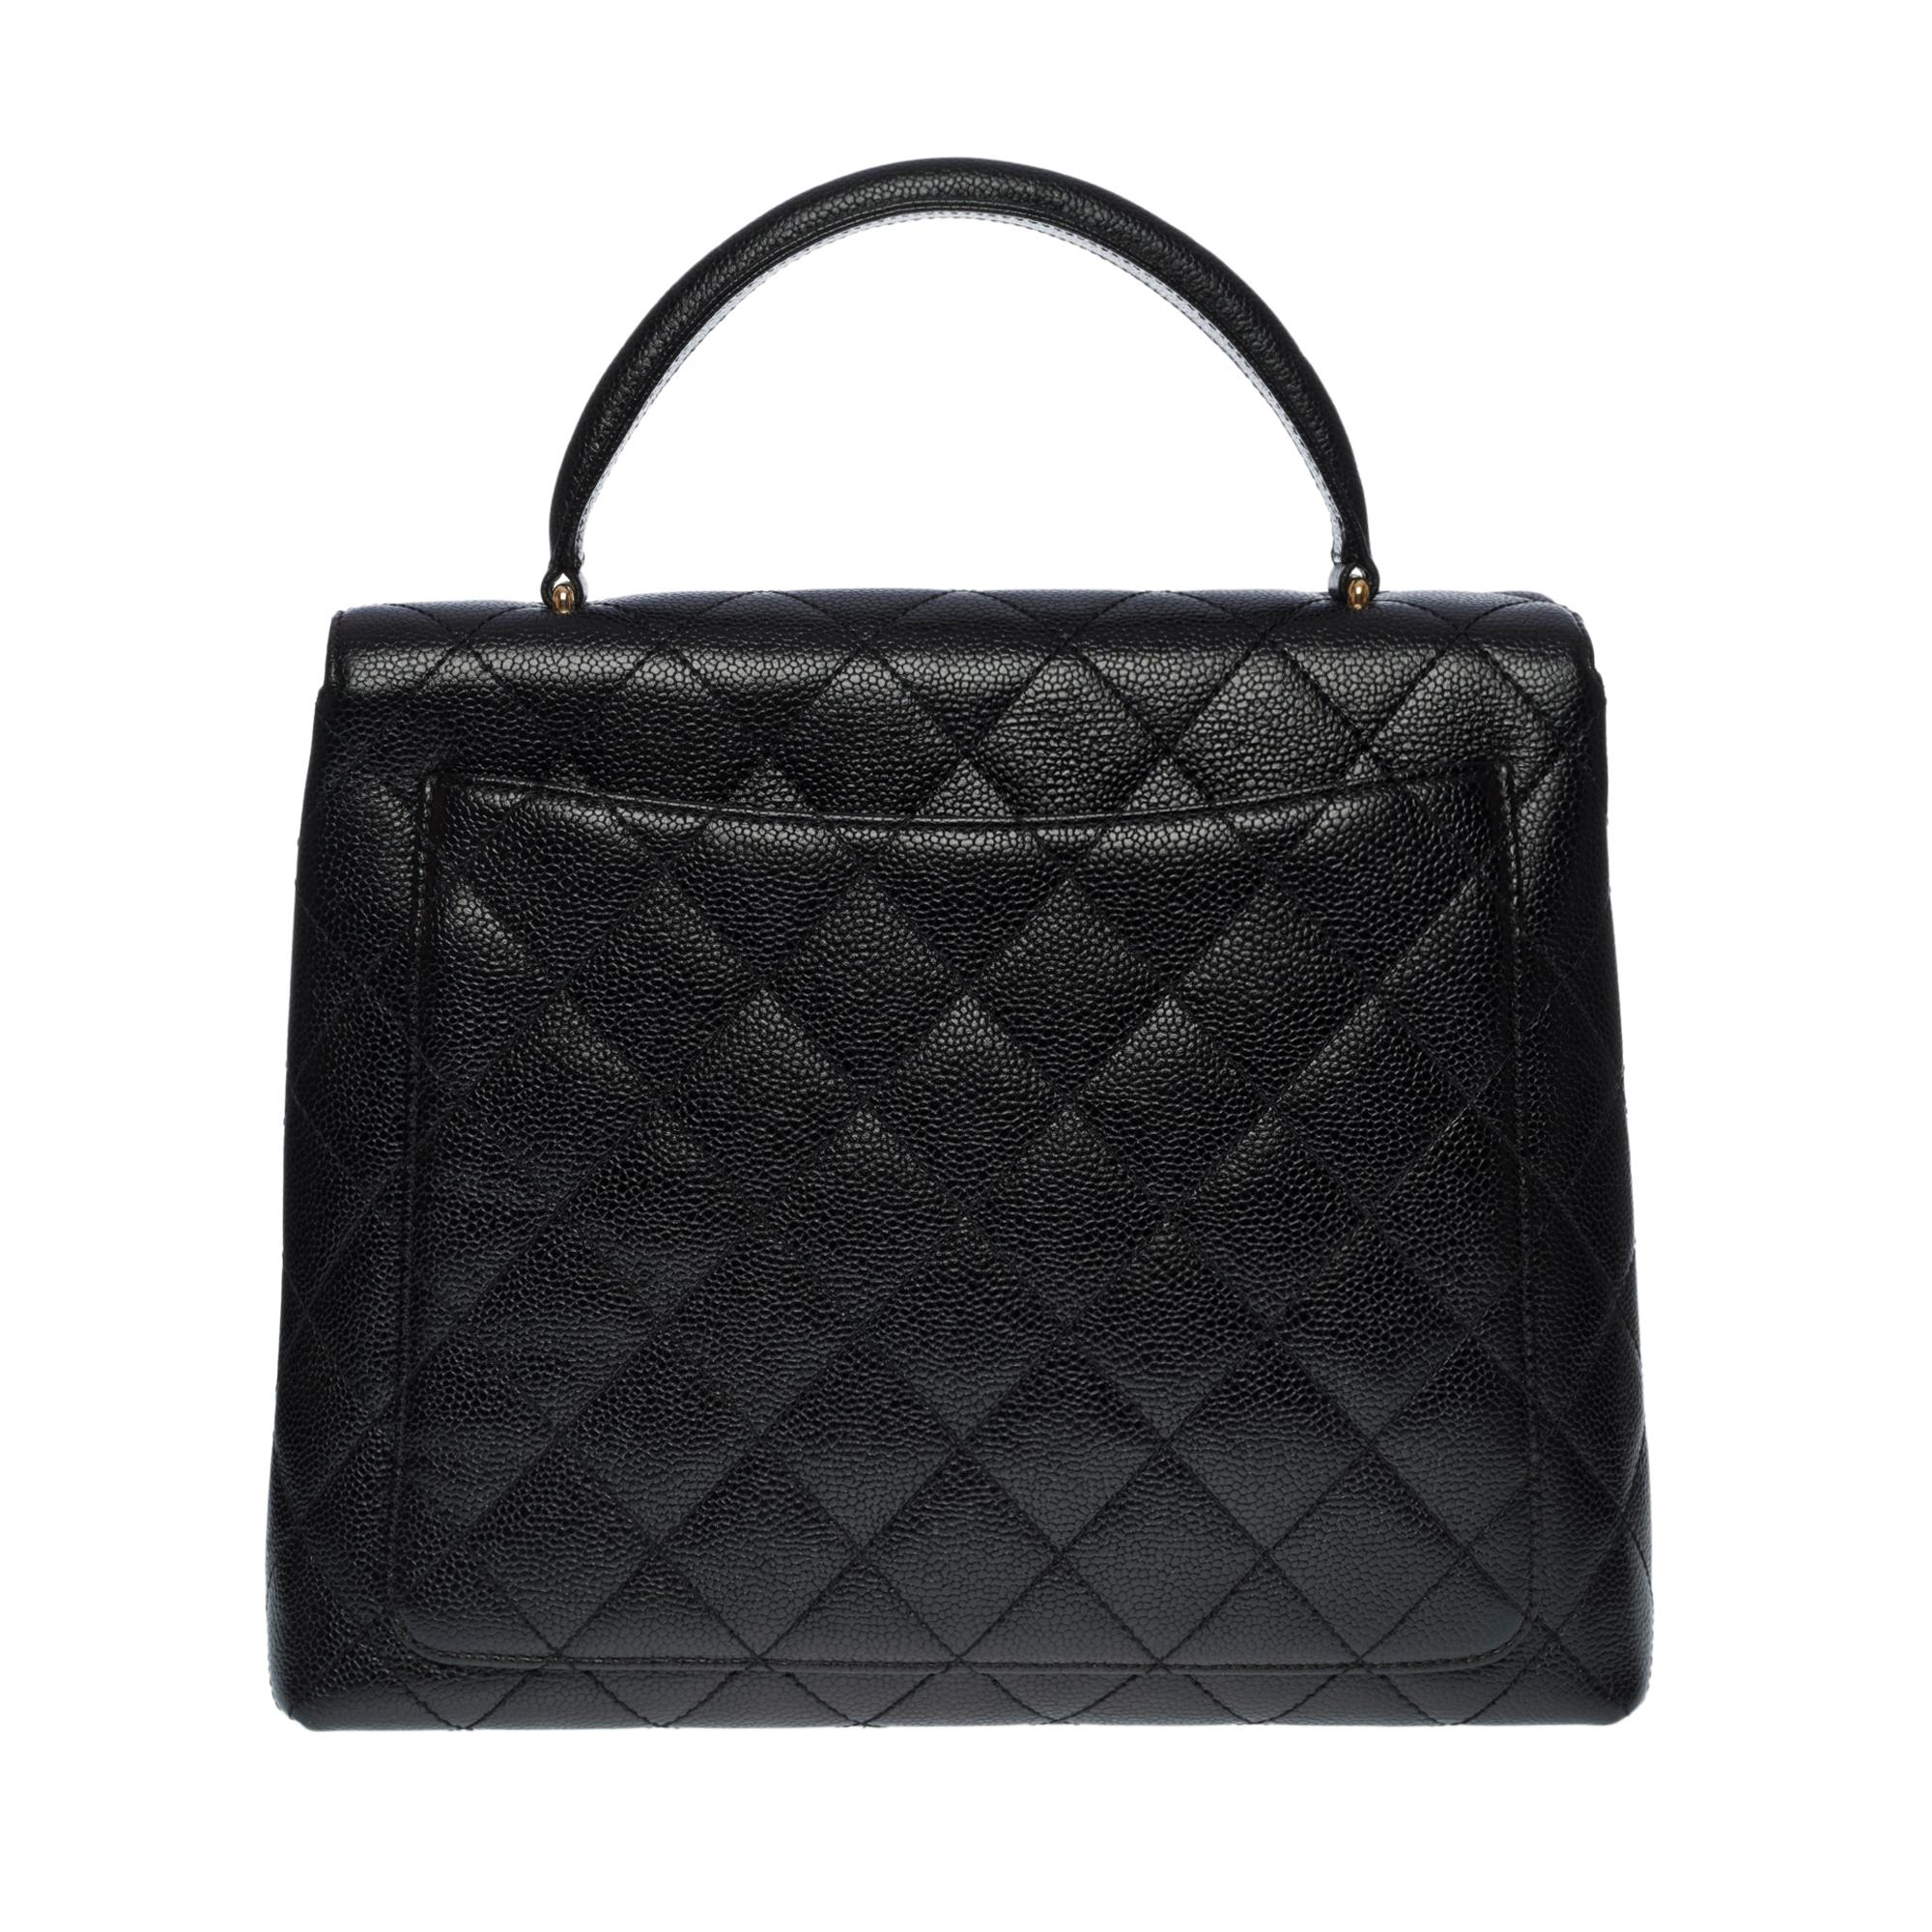 Lovely Chanel Coco Handle handbag (also called Kelly) in black quilted caviar leather, gold-plated metal hardware (24k), black leather handle for a handheld

Flap closure, gold plated CC clasp
A patch pocket on the back of the bag
Black leather